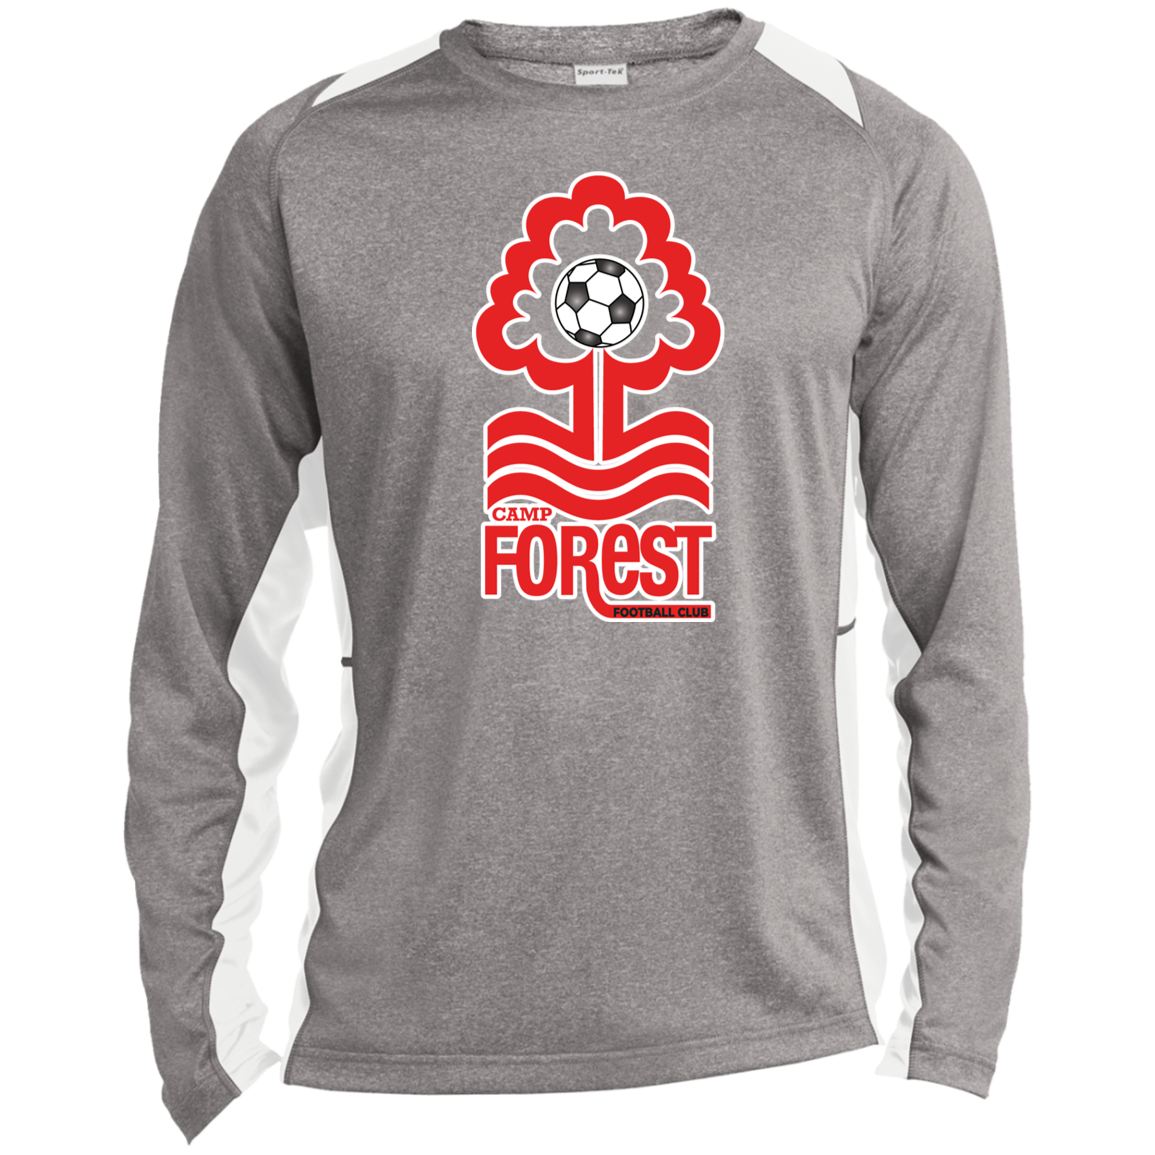 Camp Forest FC Swag